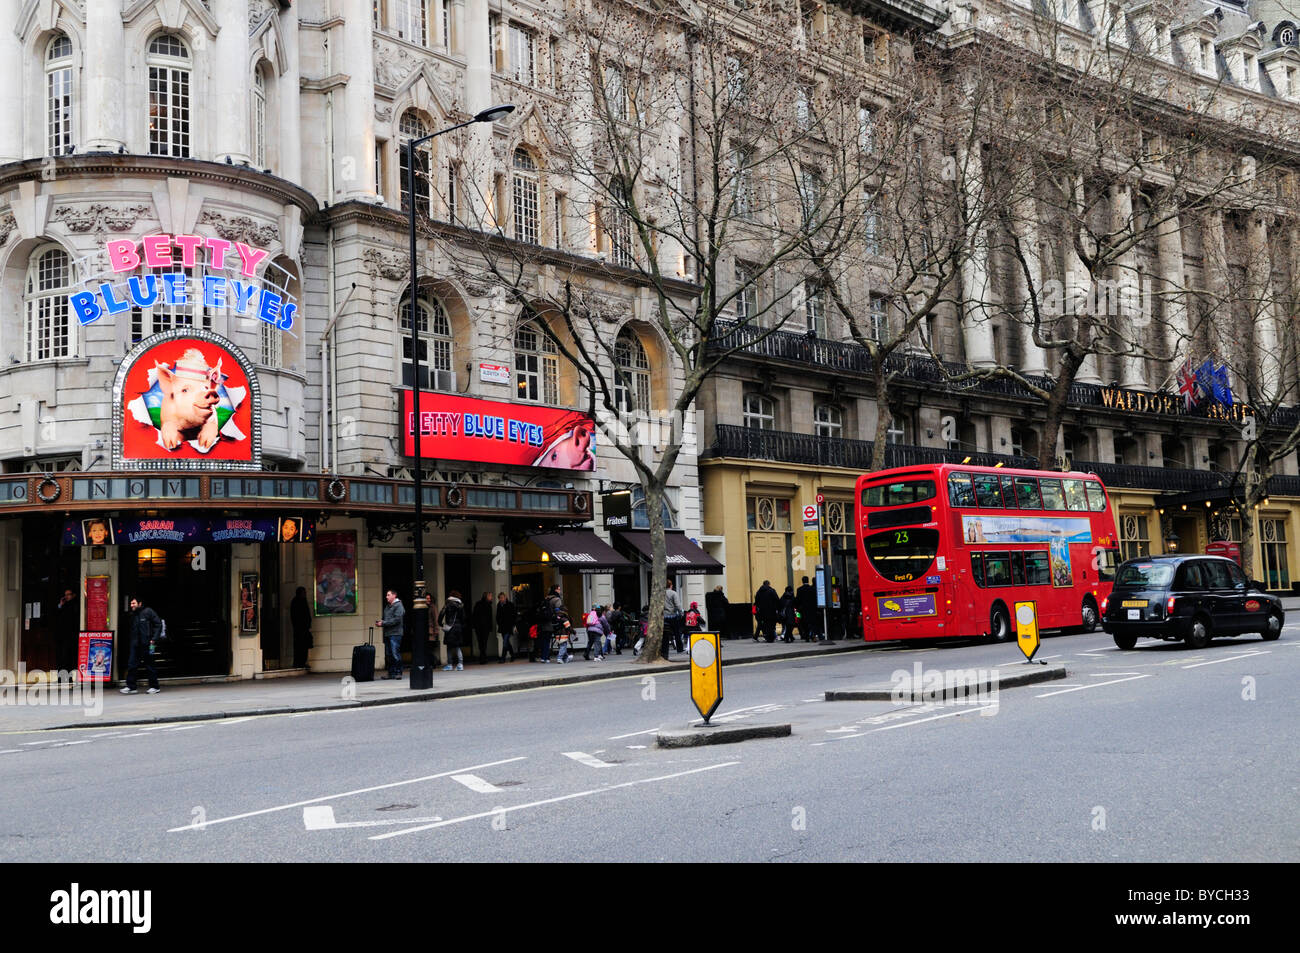 Street Scene with the Novello Theatre and Waldorf Hotel, Aldwych, London, England, UK Stock Photo